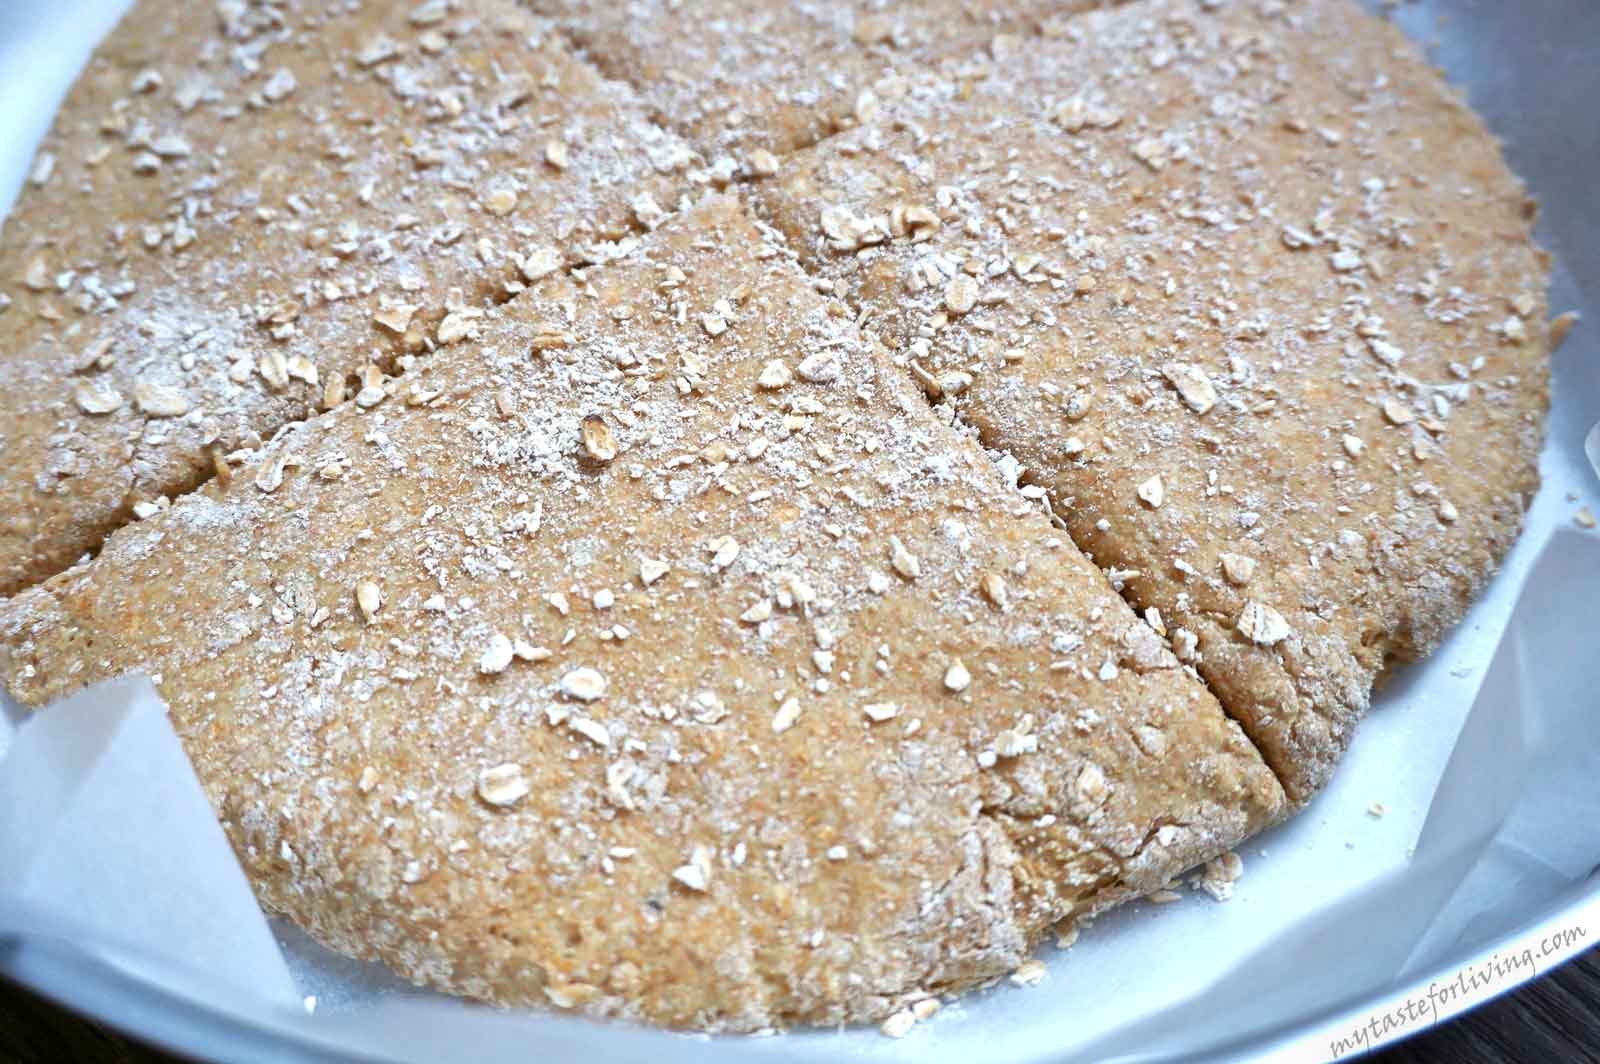 Dairy-free soda bread with einkorn flour and old fashioned rolled oats suitable for your table on Christmas Eve. Why with oats? They make the crust slightly crispy and enhance the aroma and taste that einkorn flour gives.